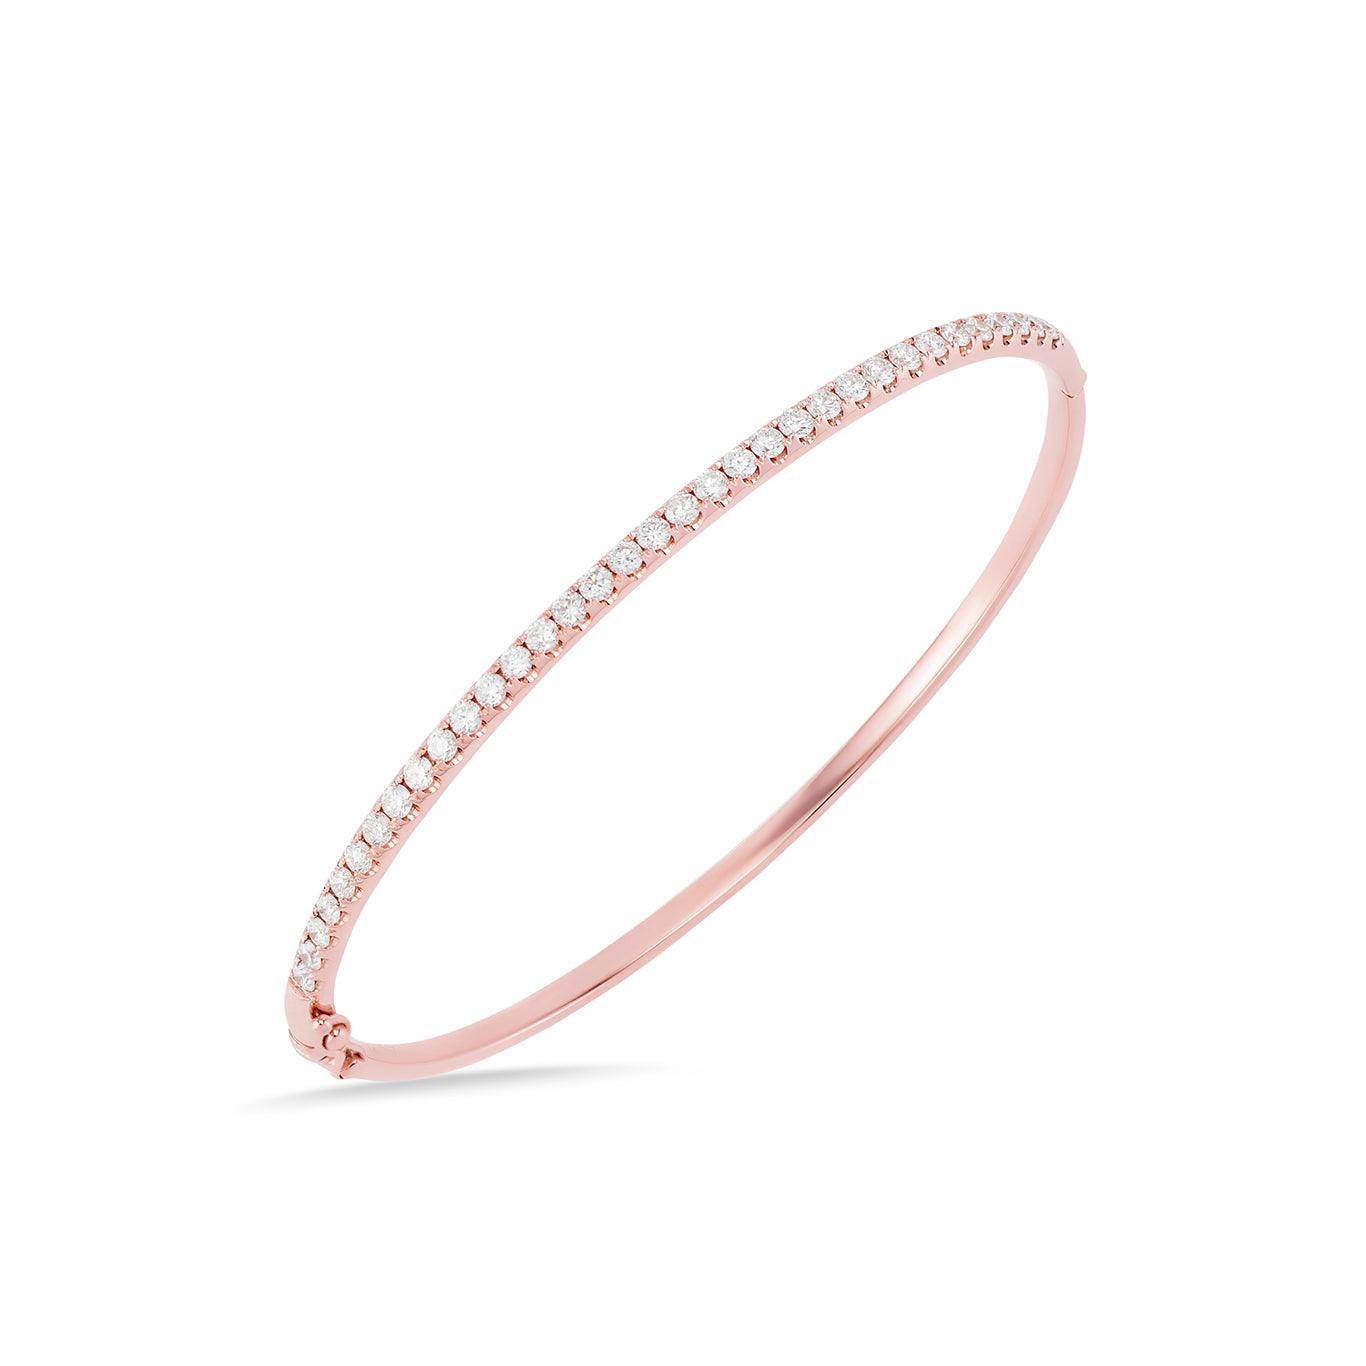 Real Diamond & Rose Gold Plated 925 Sterling Silver Bracelet For Her